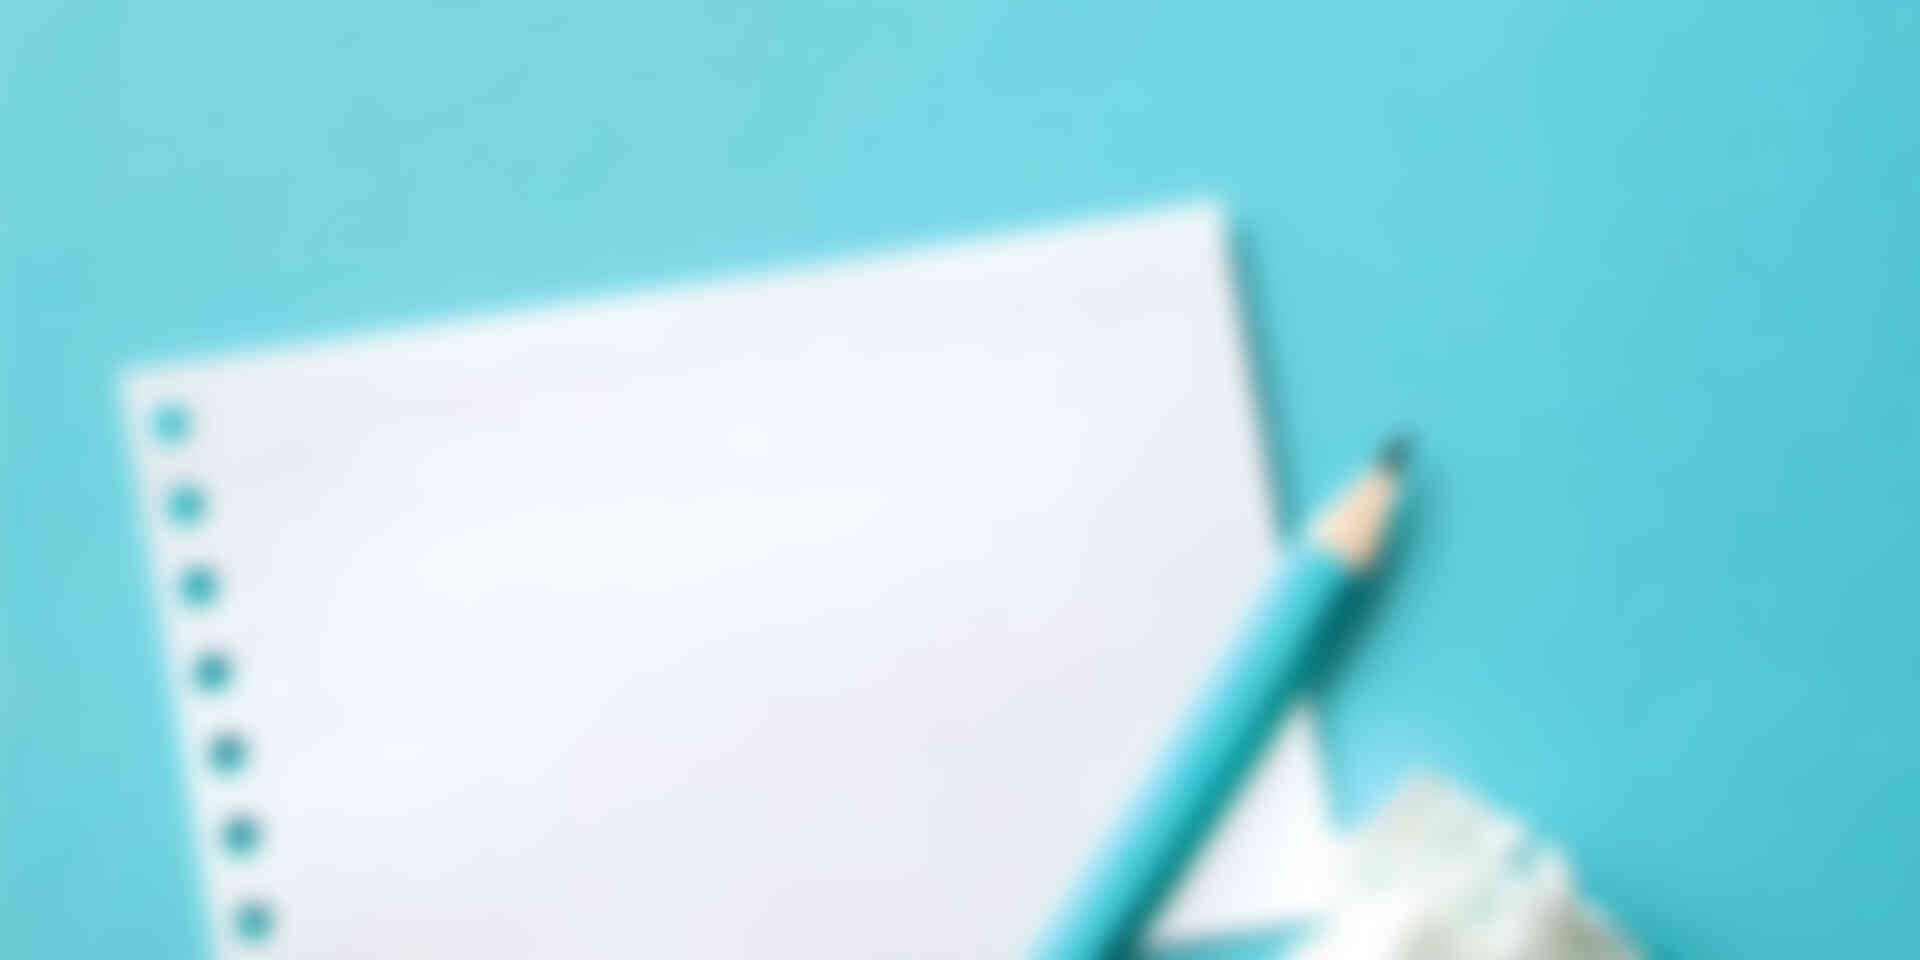 How to make important information stand out - blank-paper-with-blue-pencil